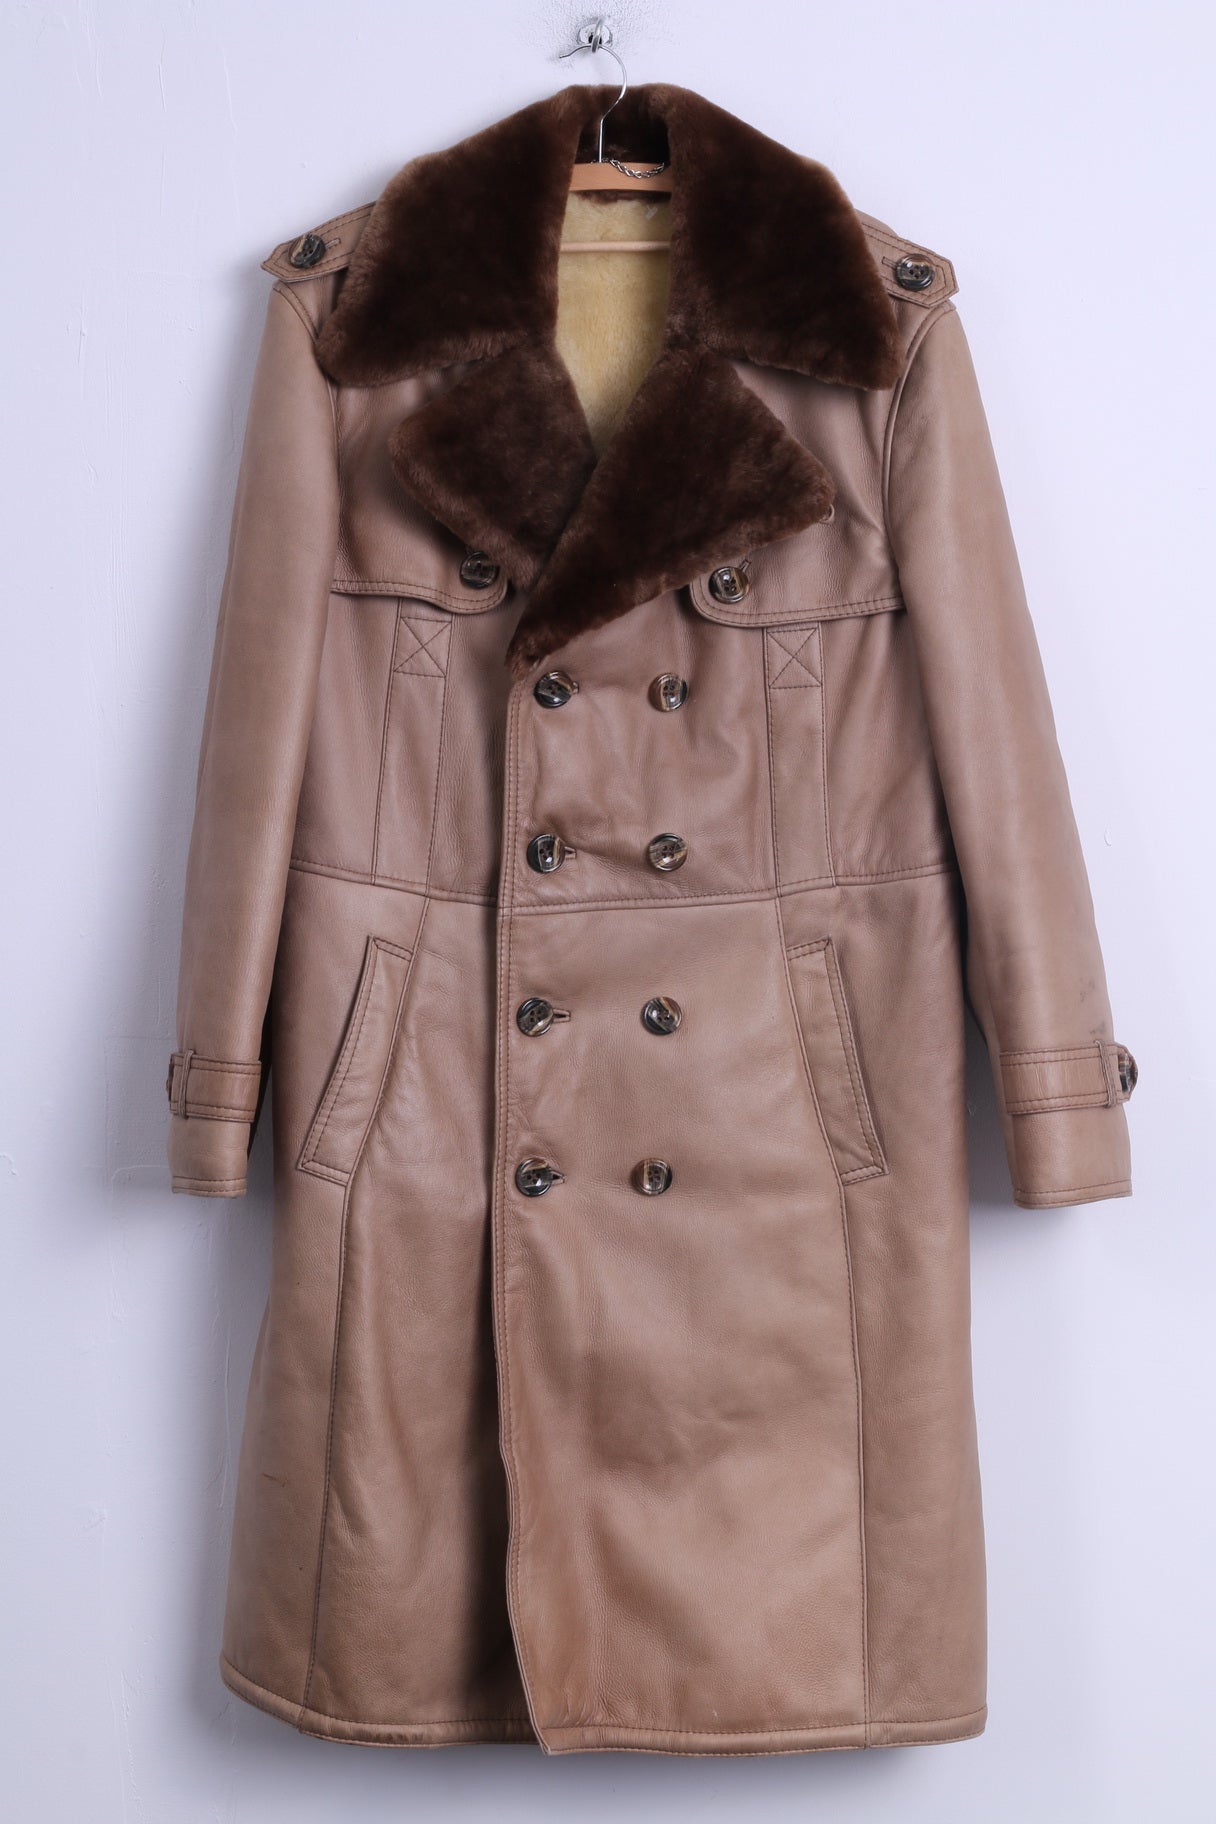 Womens L Coat Beige Leather Fur Buttoned Sheep Lined Warm Long belted Winter Coat